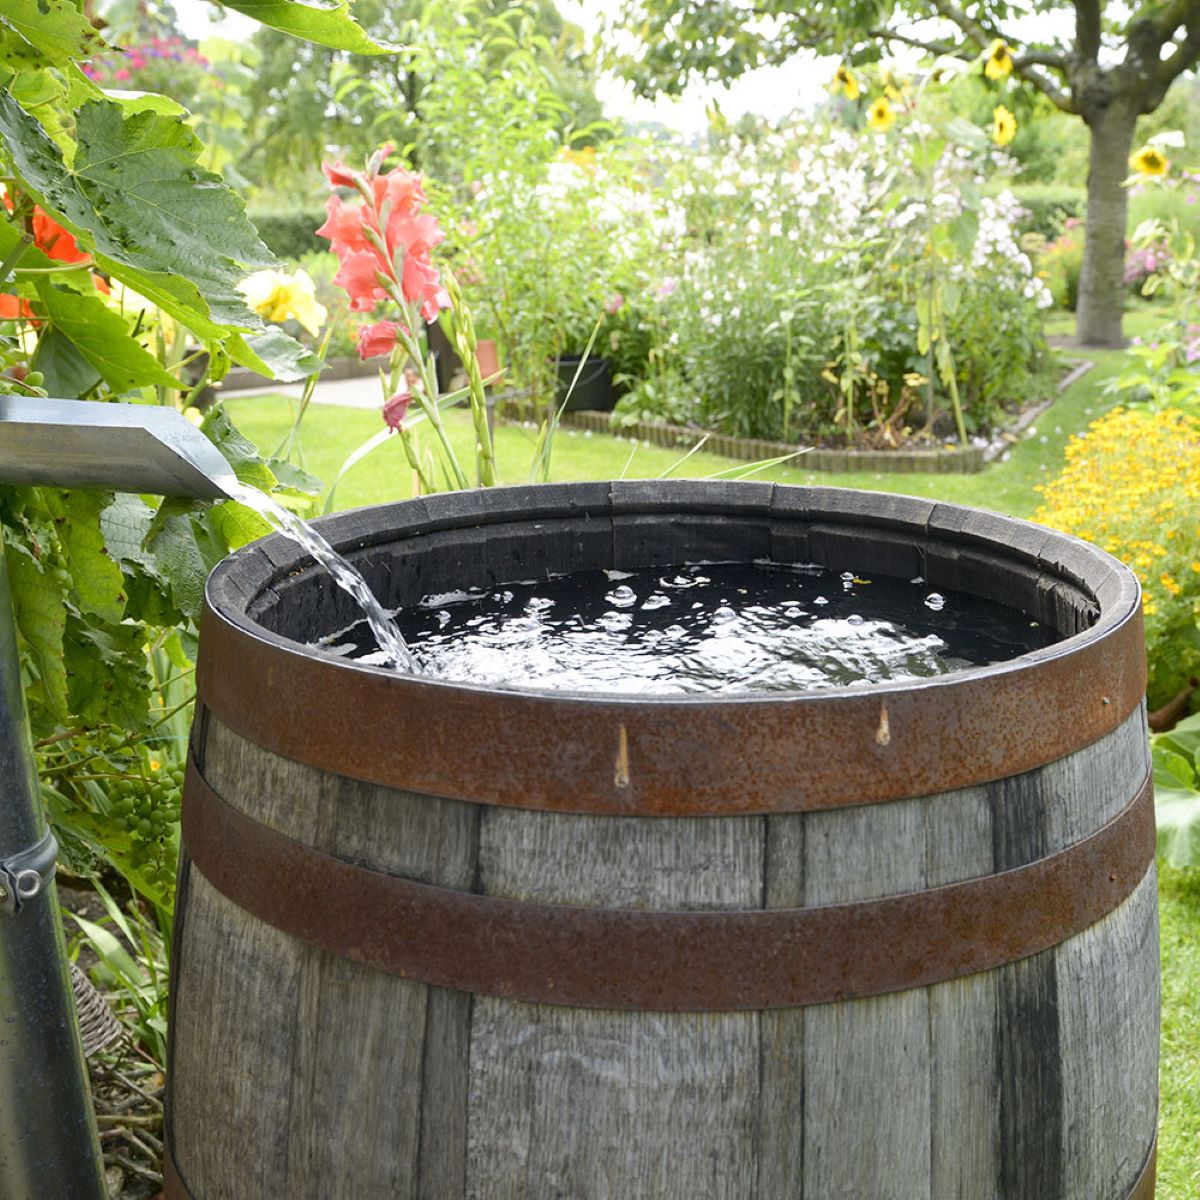 How To Store Water In Barrels